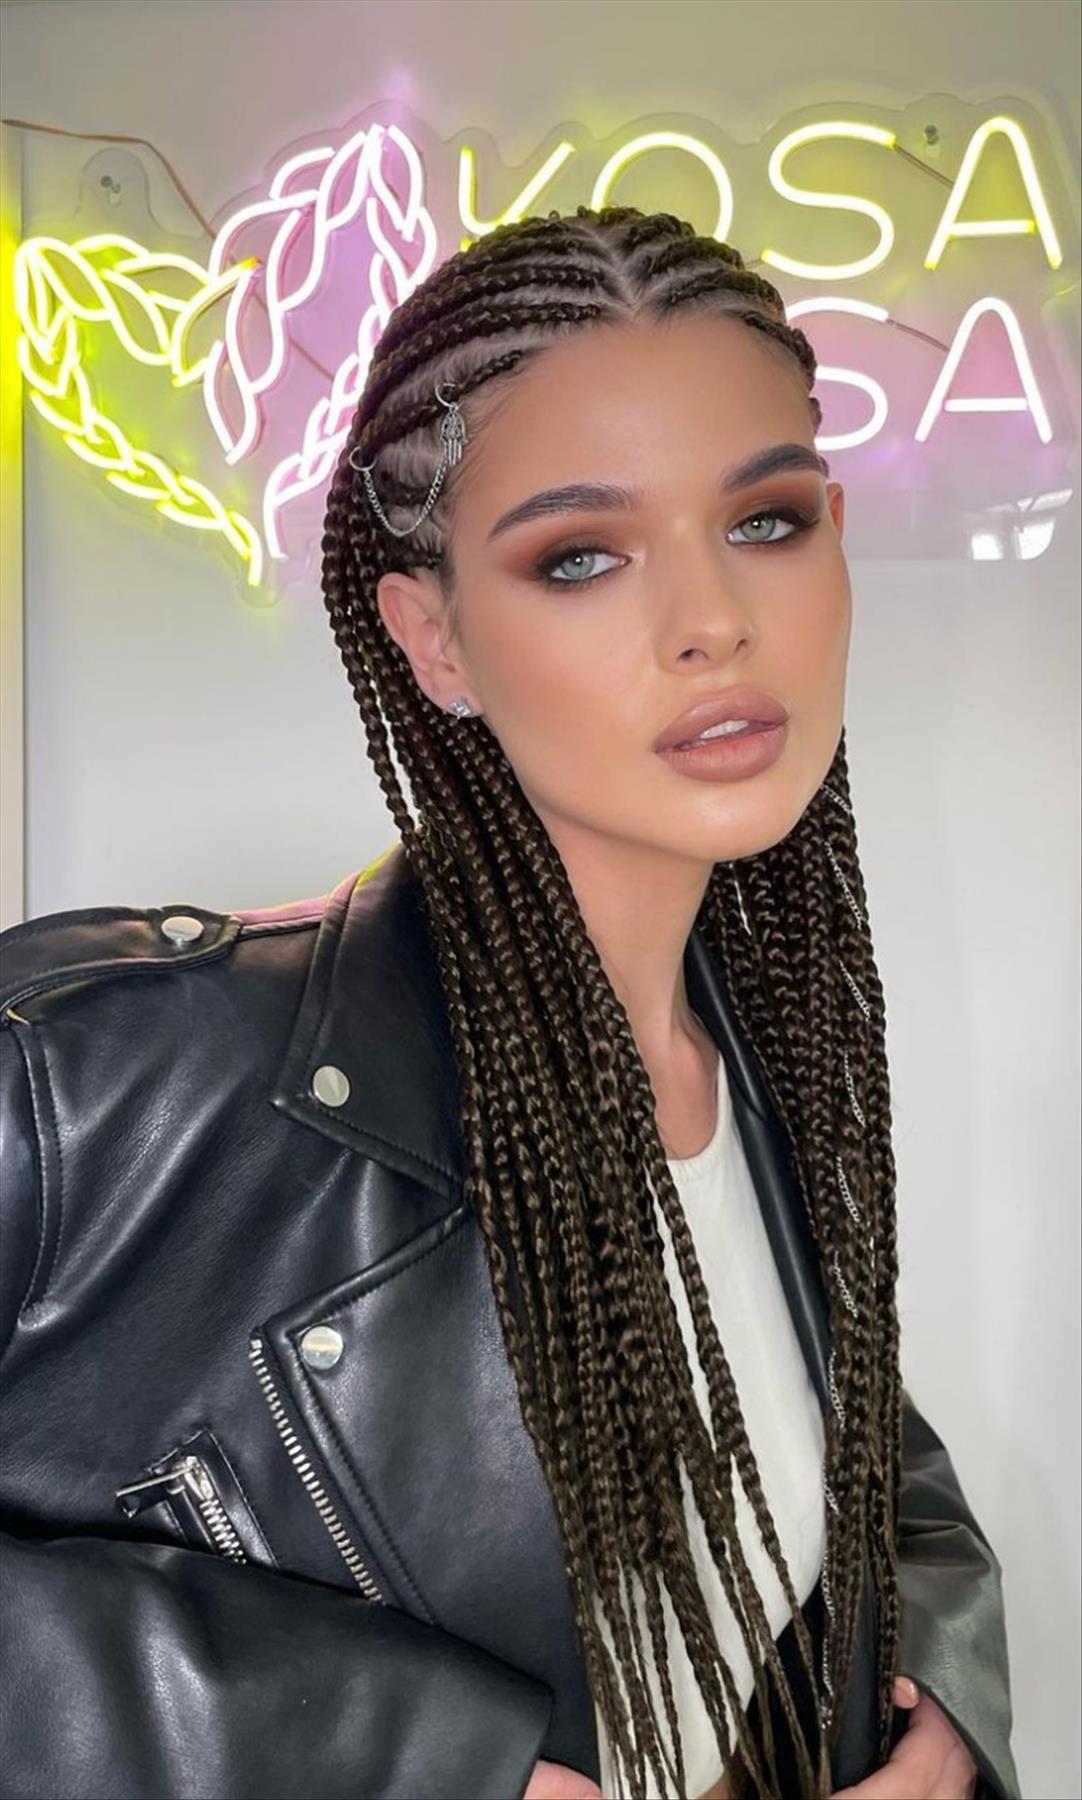 Cool braided hairstyle for your next look